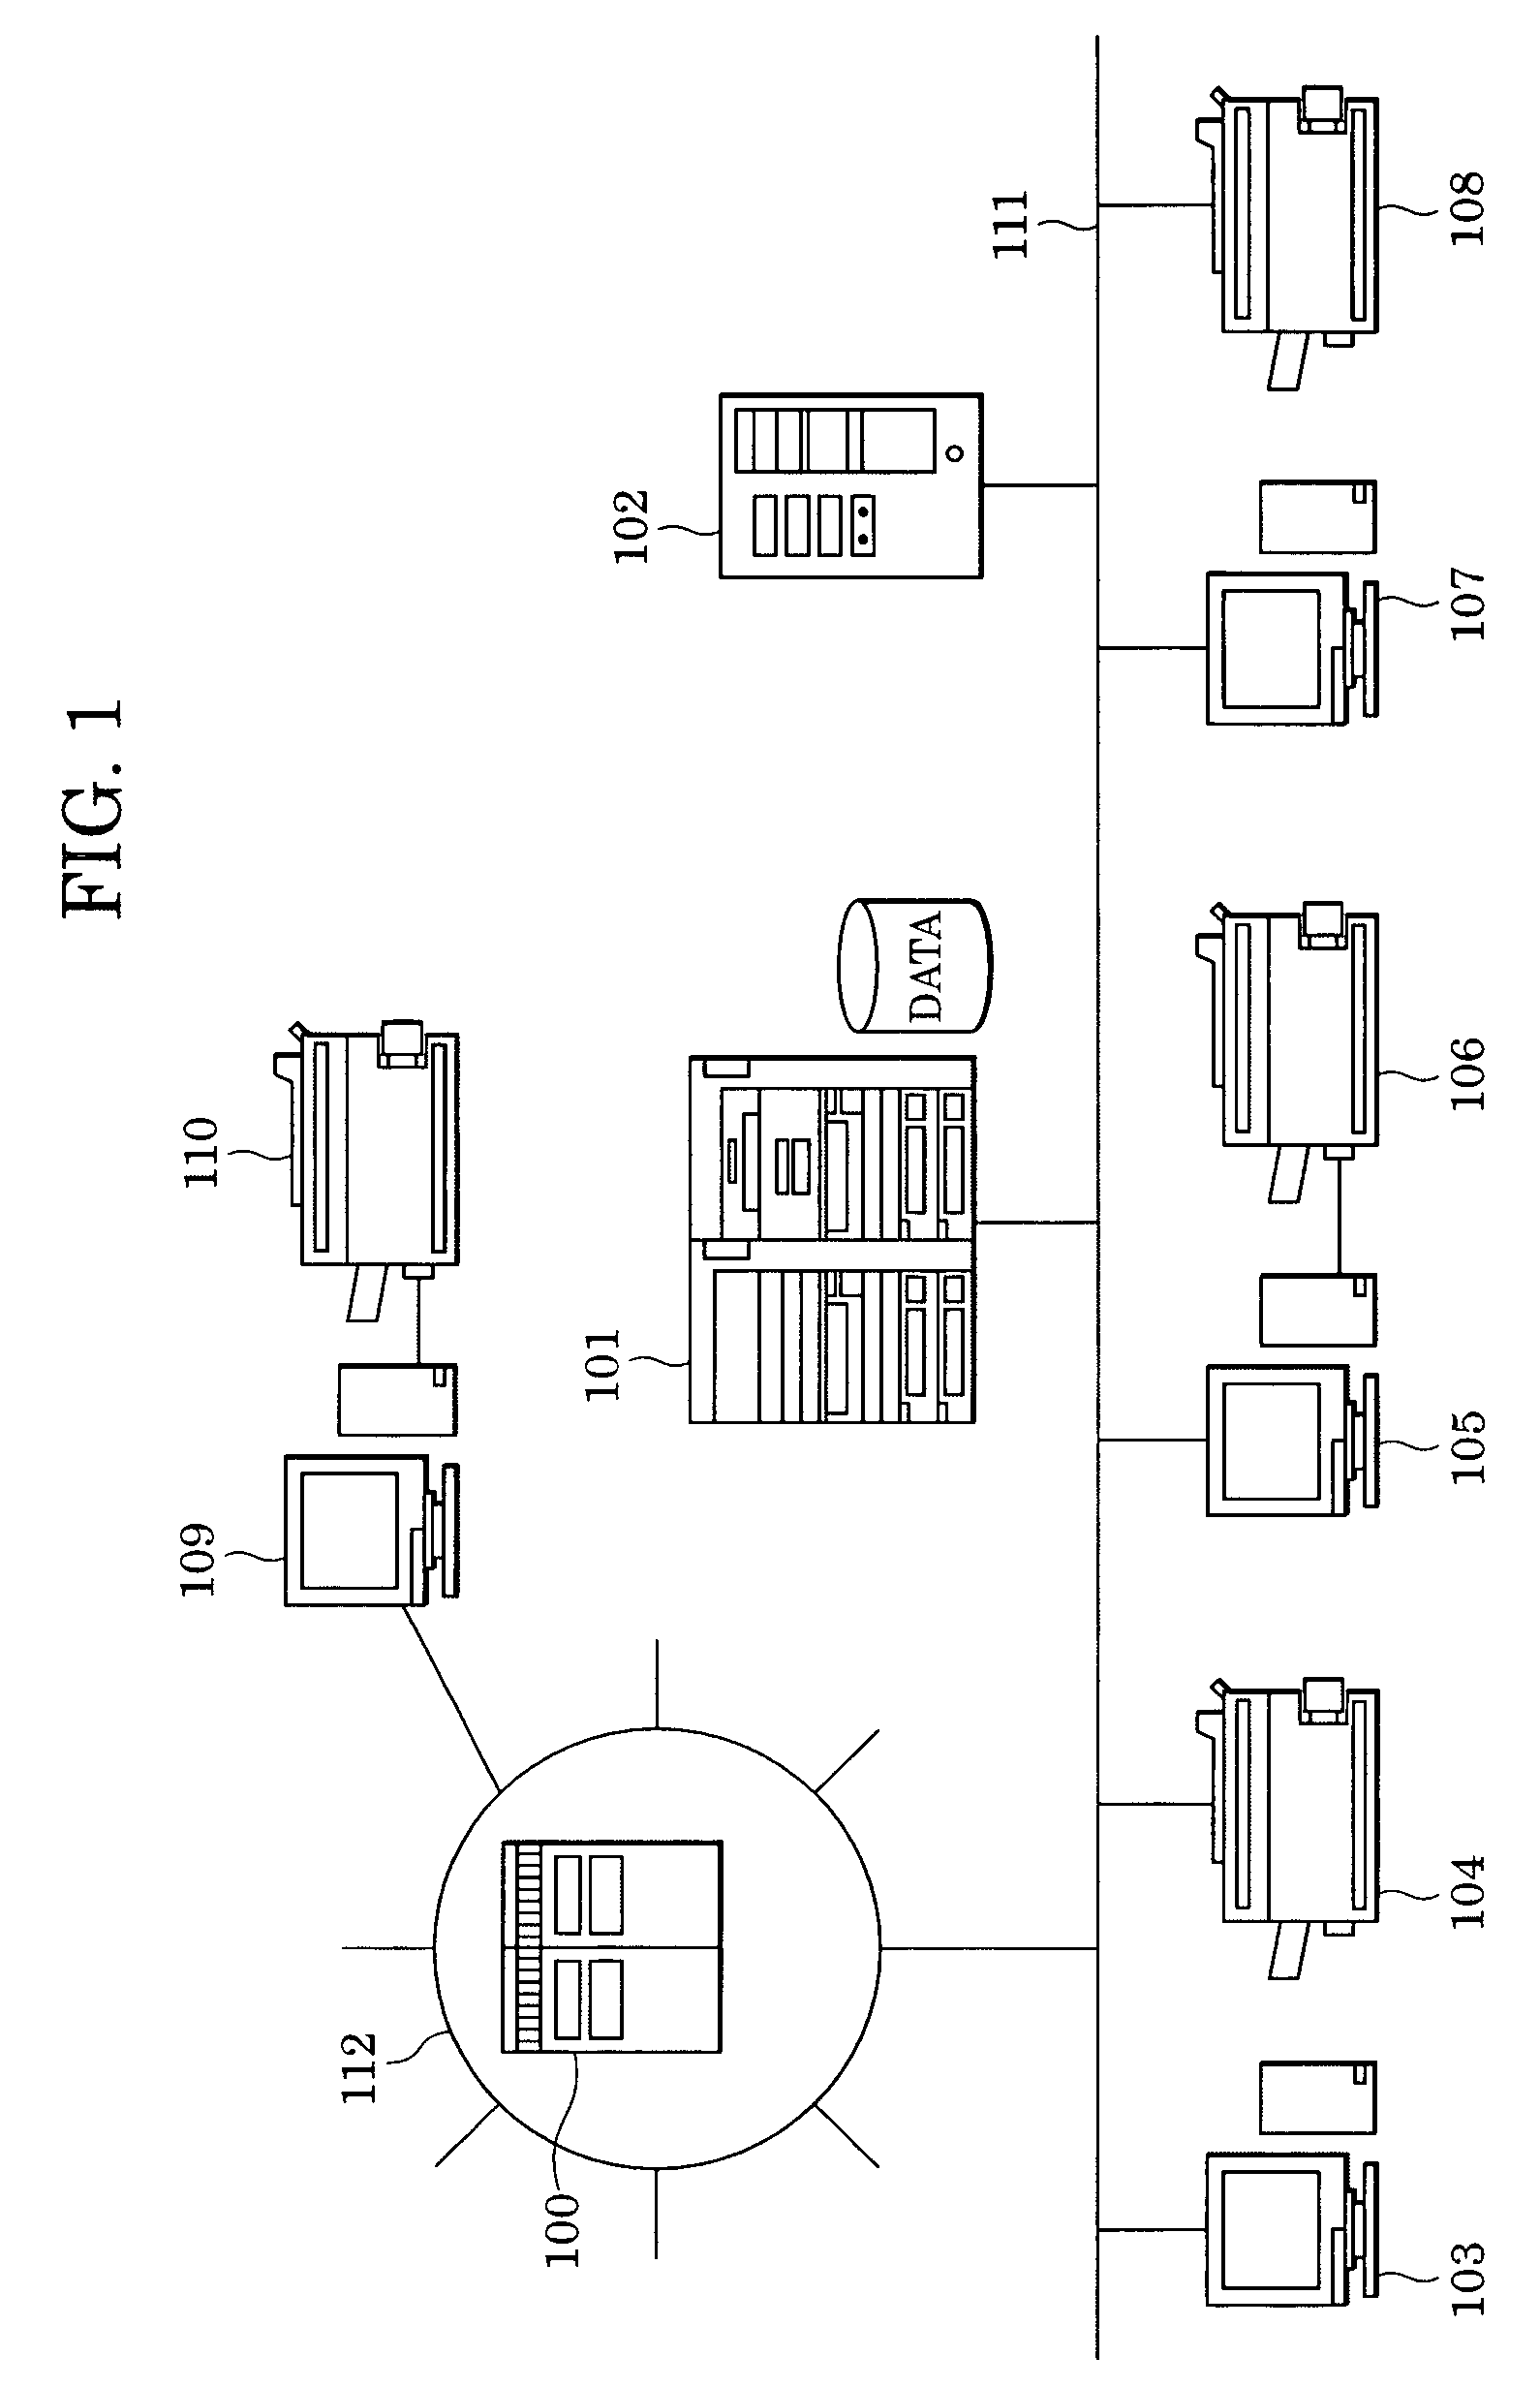 Data processing system, data processing method and apparatus, document printing system, client device, printing device, document printing method, and computer program